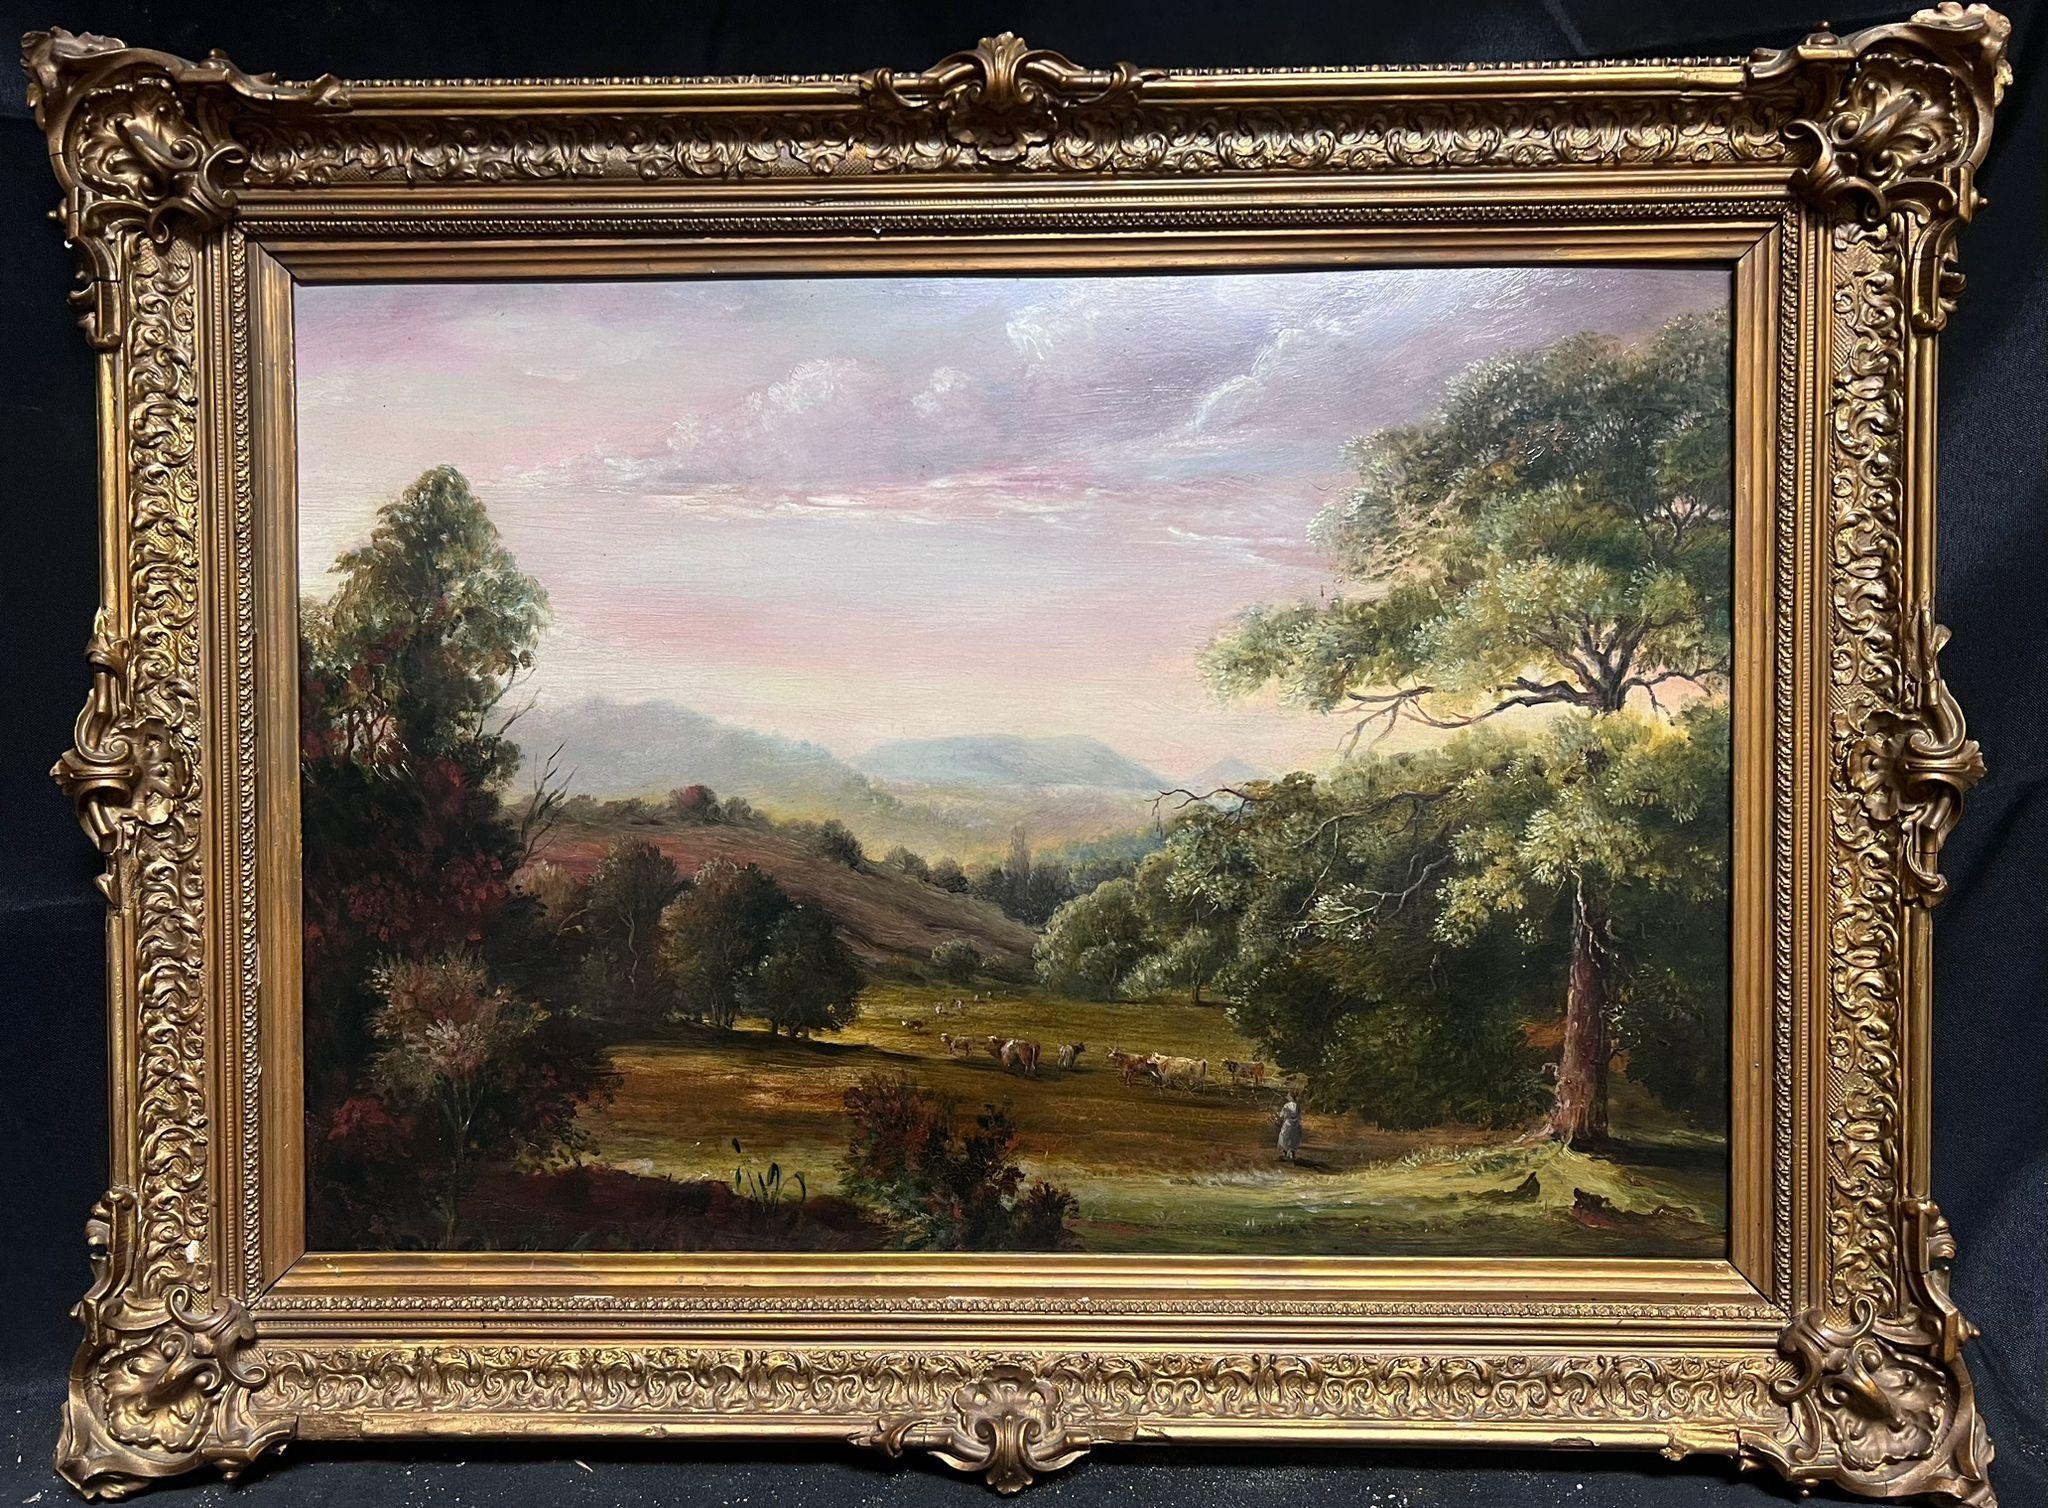 English Antique Oil Animal Painting - 19th Century English Oil Painting Figure & Cattle in Green Pastures Valley